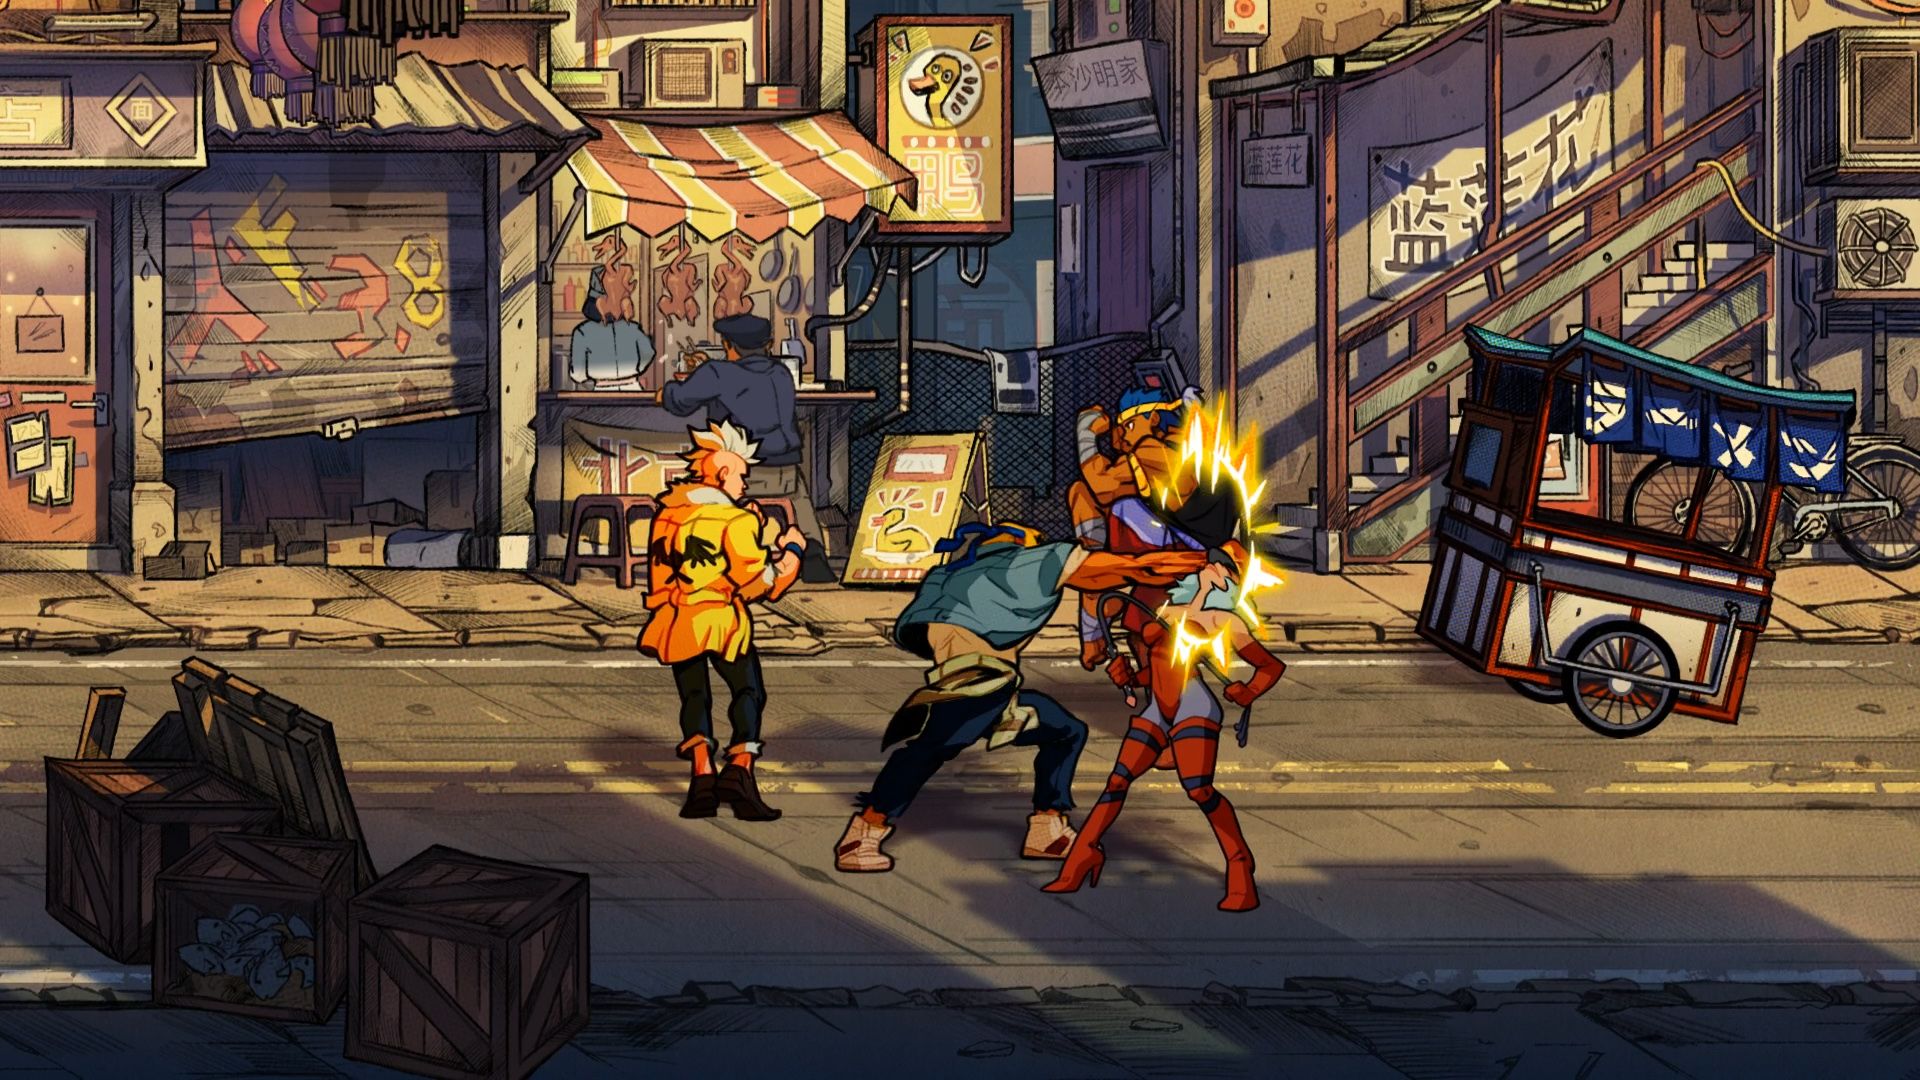 Streets of Rage 4' is shaping up to be a worthy sequel